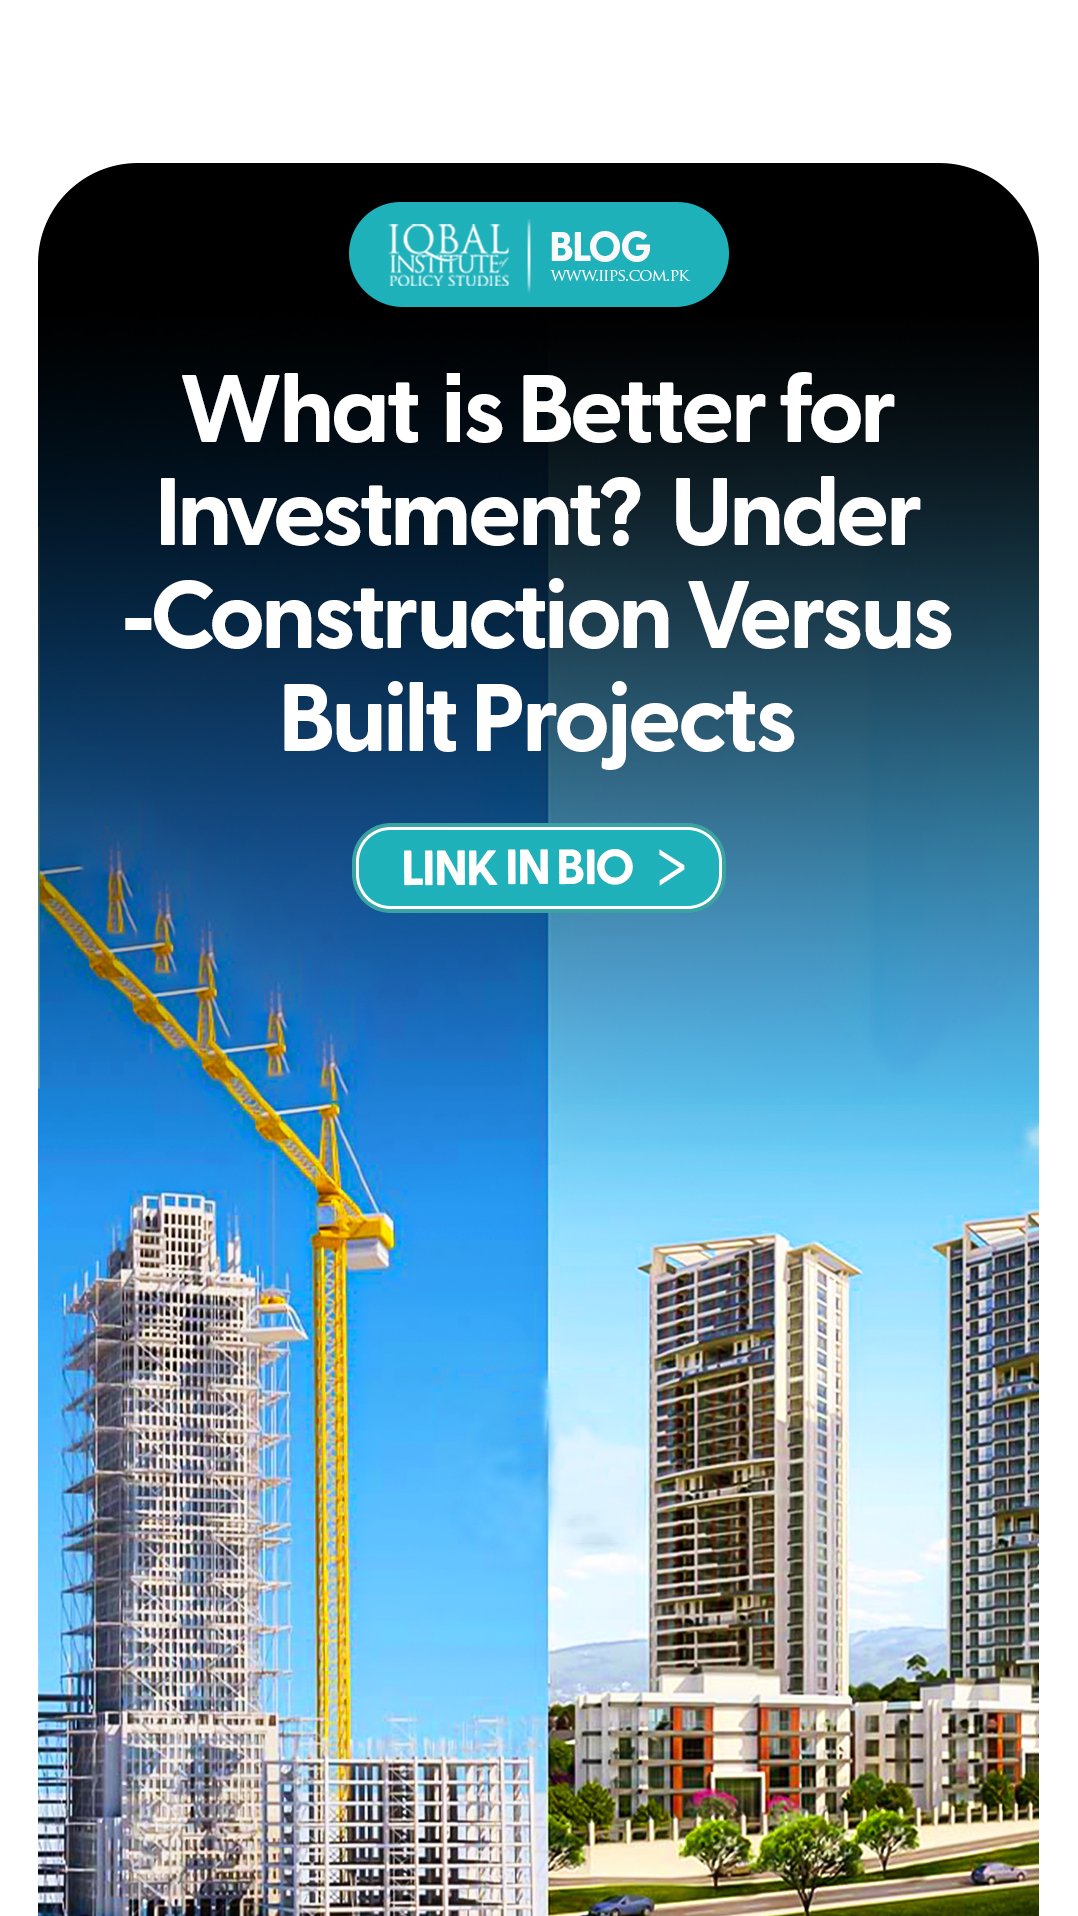 what is better for investment? under-construction versus built projects